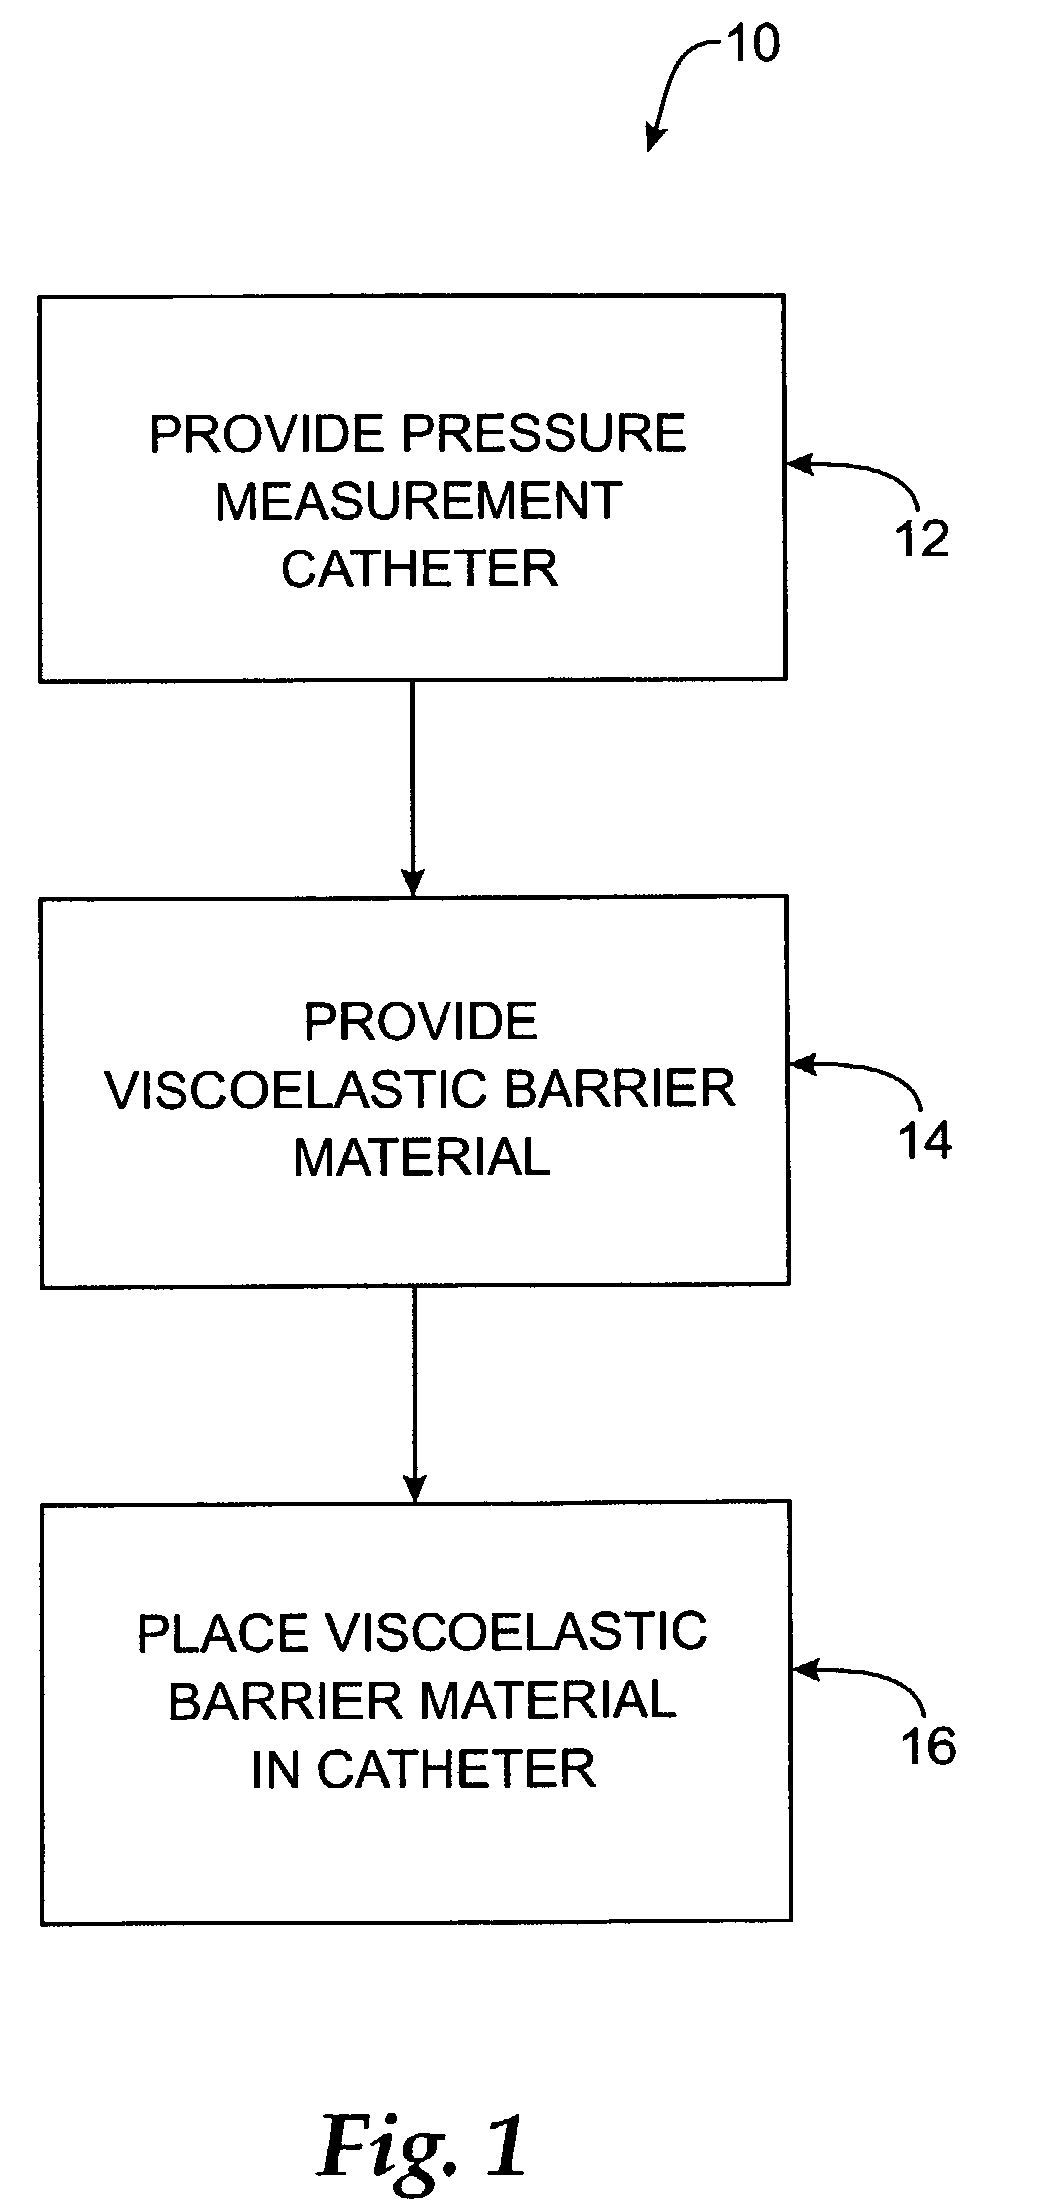 Barriers and methods for pressure measurement catheters